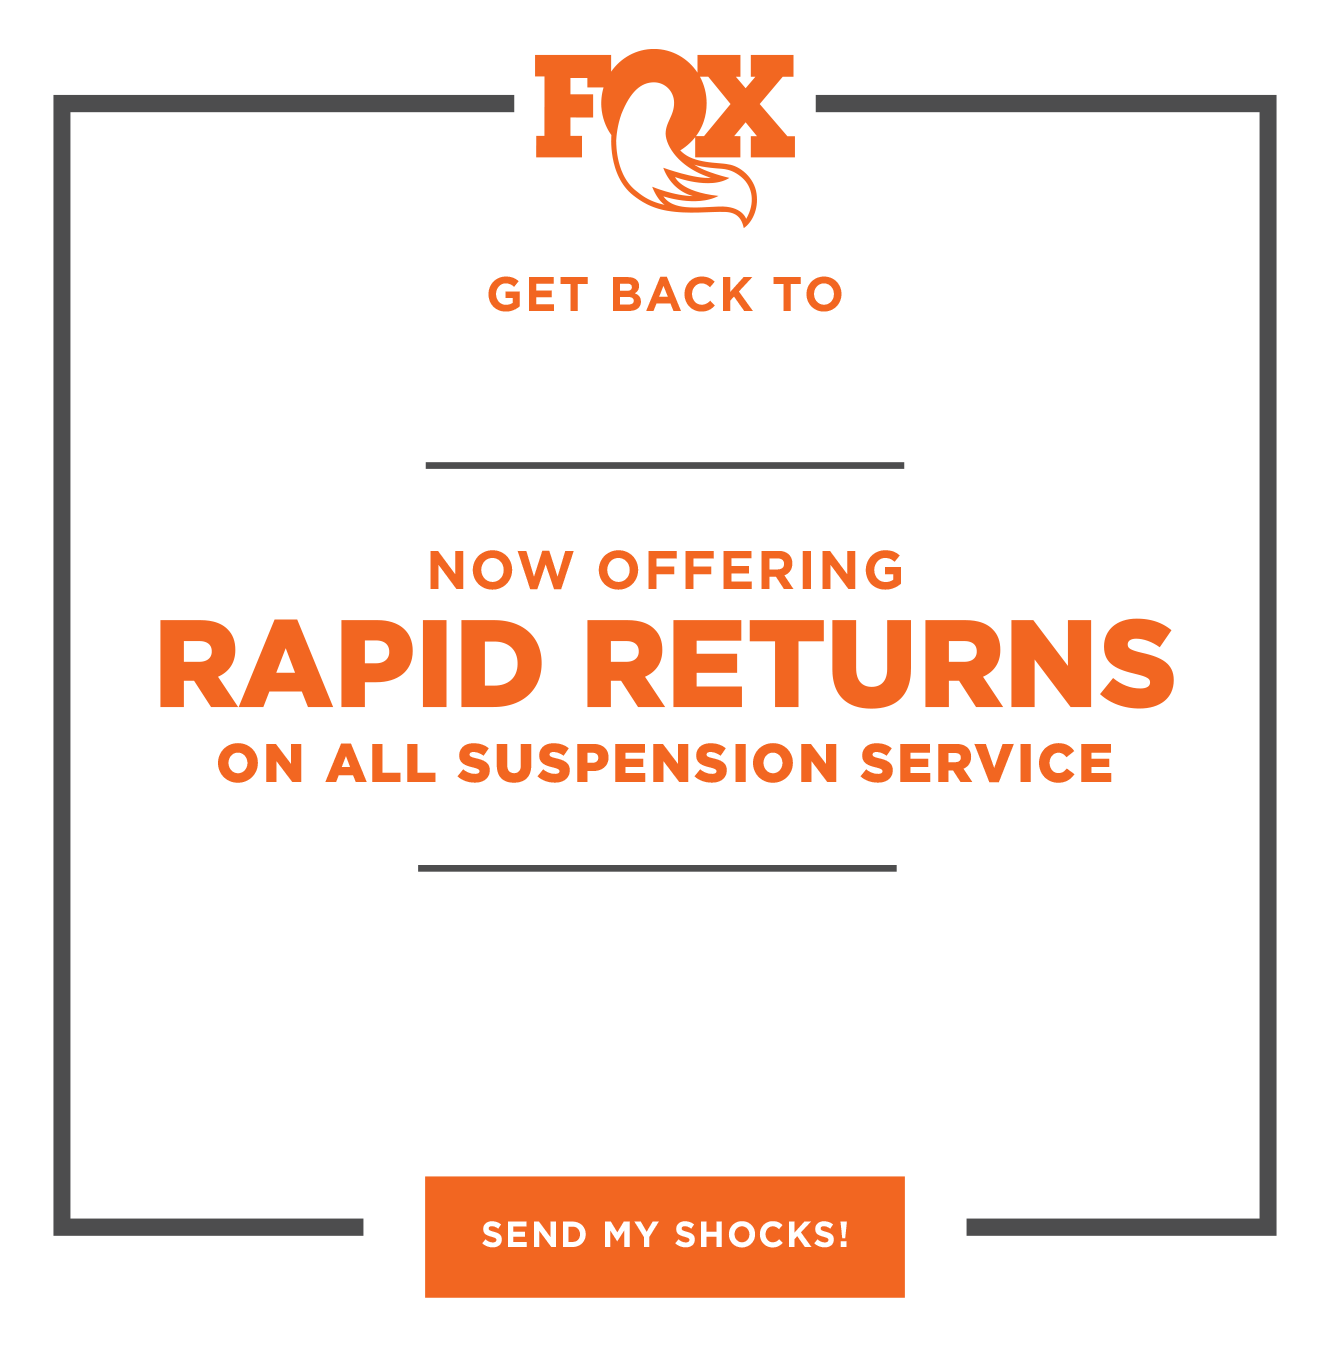 Now offering rapud returns. Send in your shocks now!